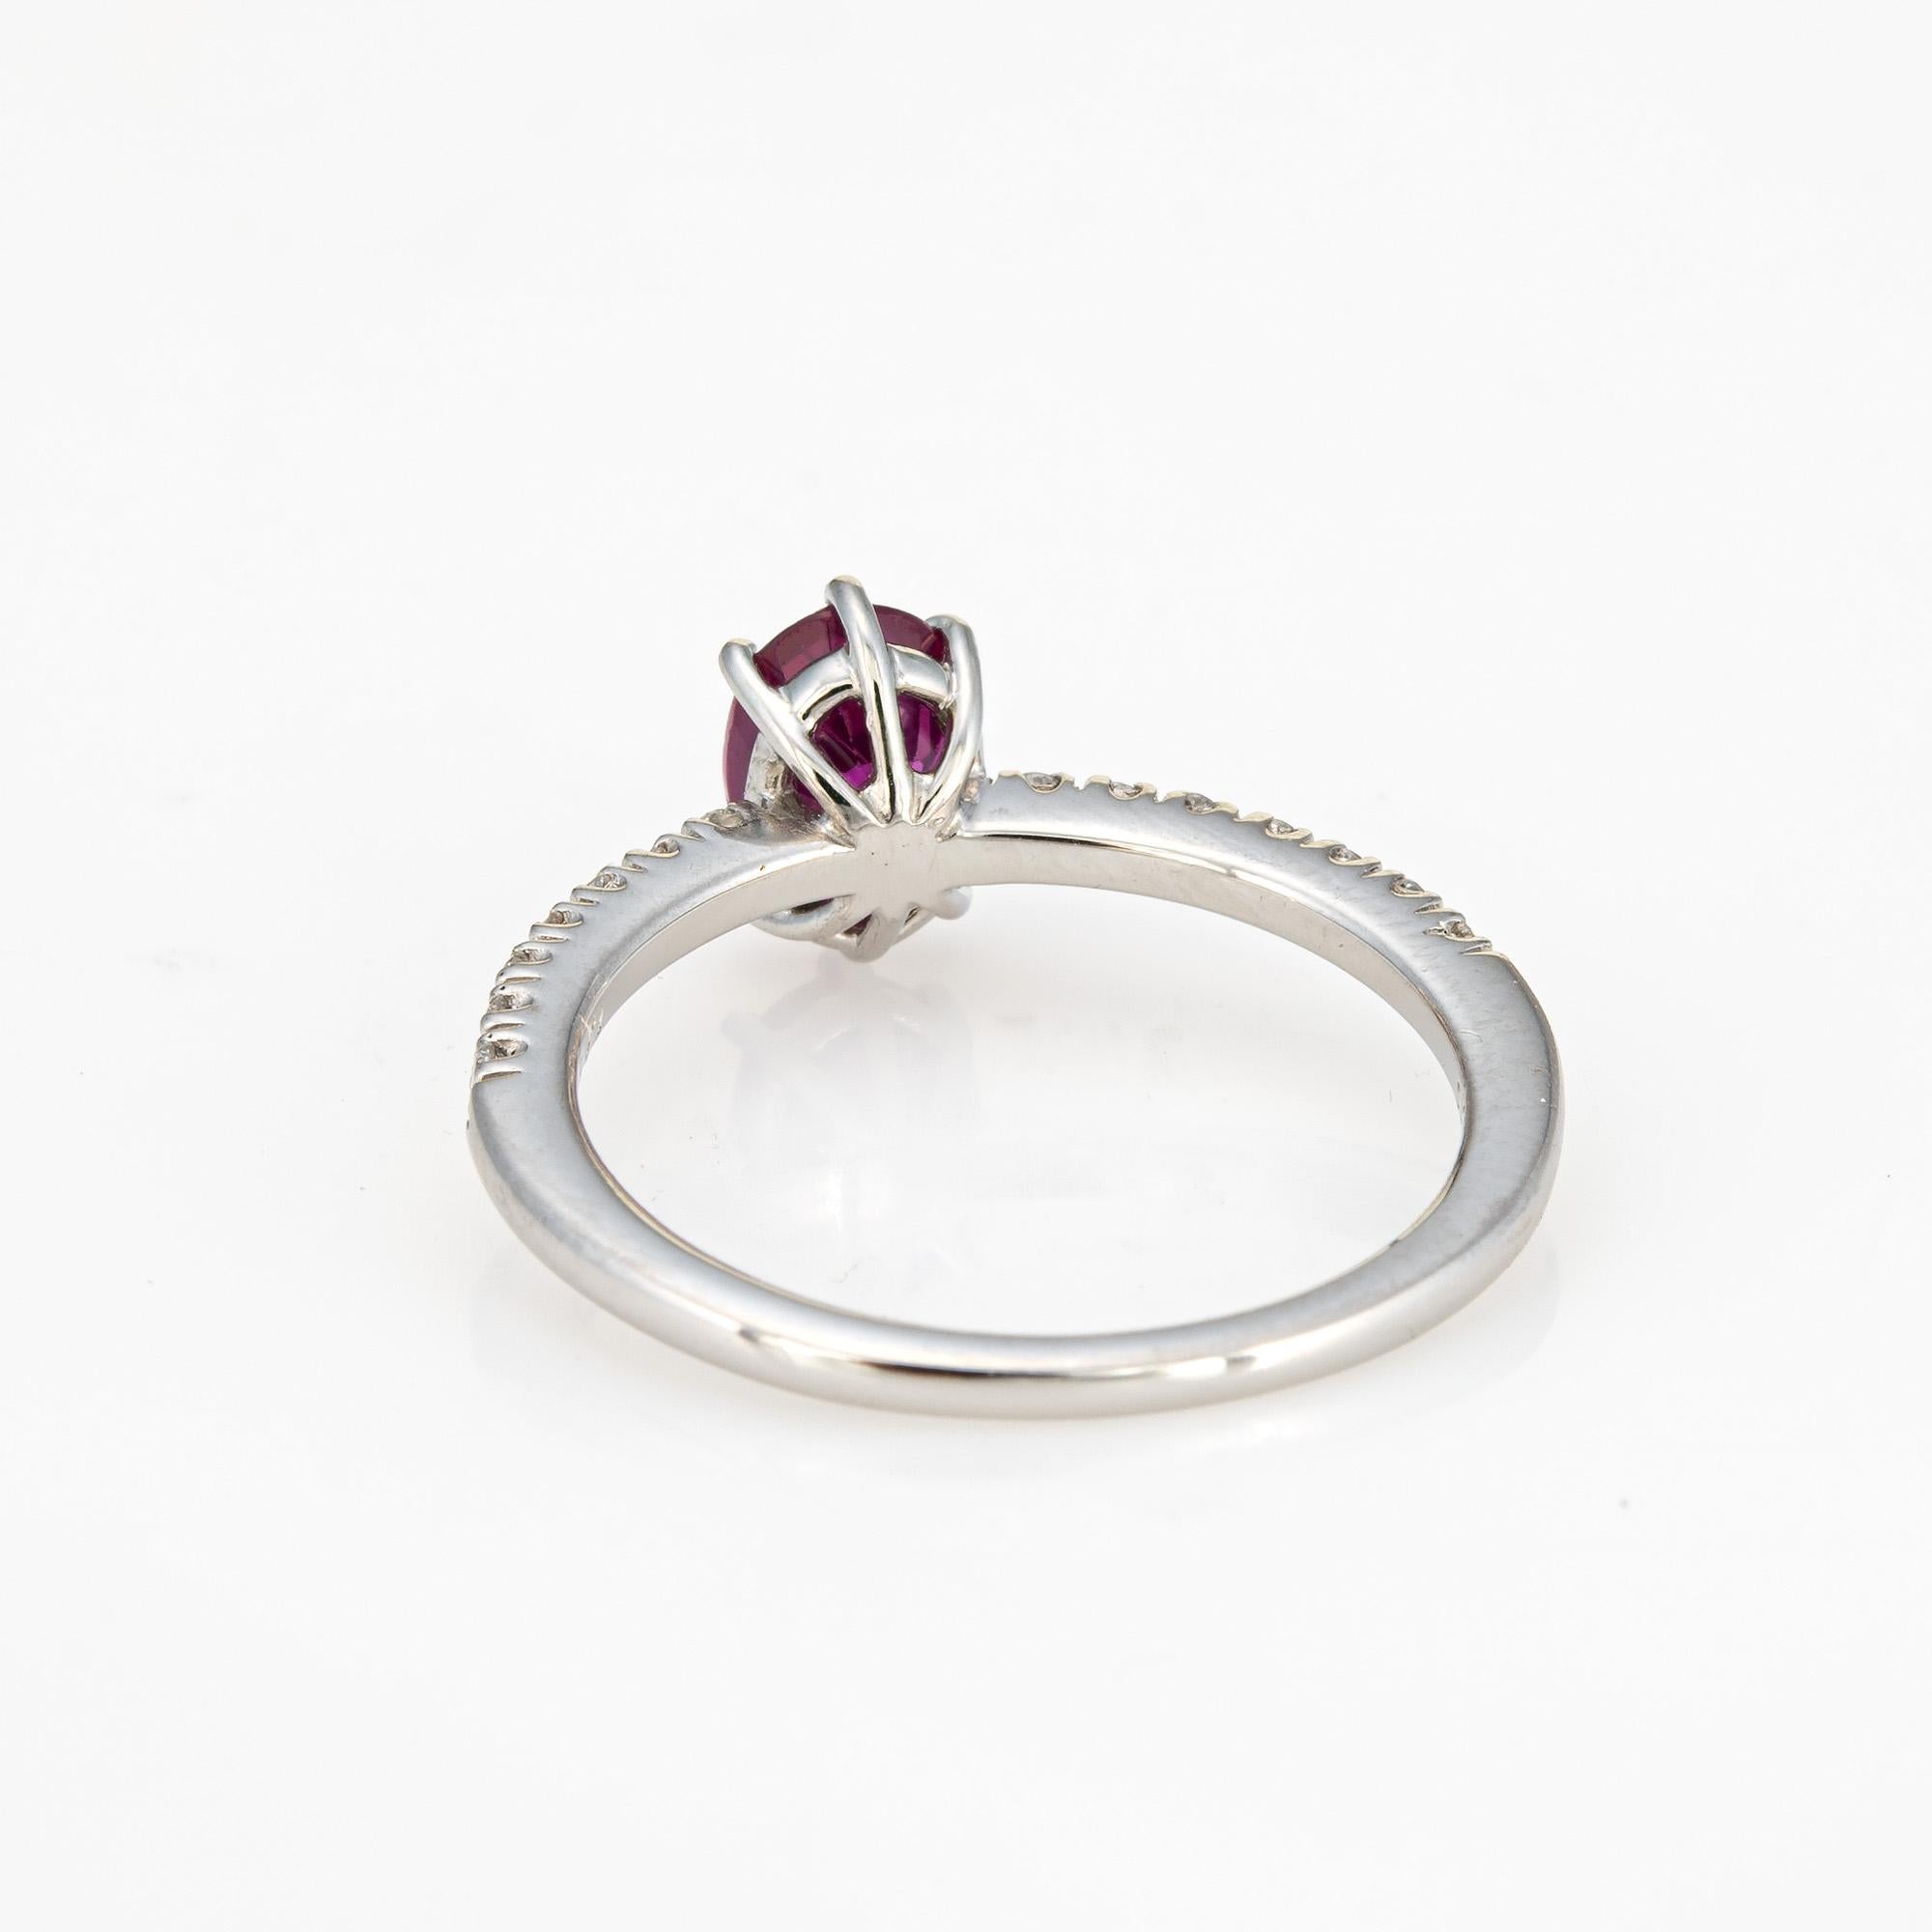 1.16ct Ruby Diamond Ring Platinum 6 Estate Fine Jewelry Gemstone Engagement In Good Condition For Sale In Torrance, CA